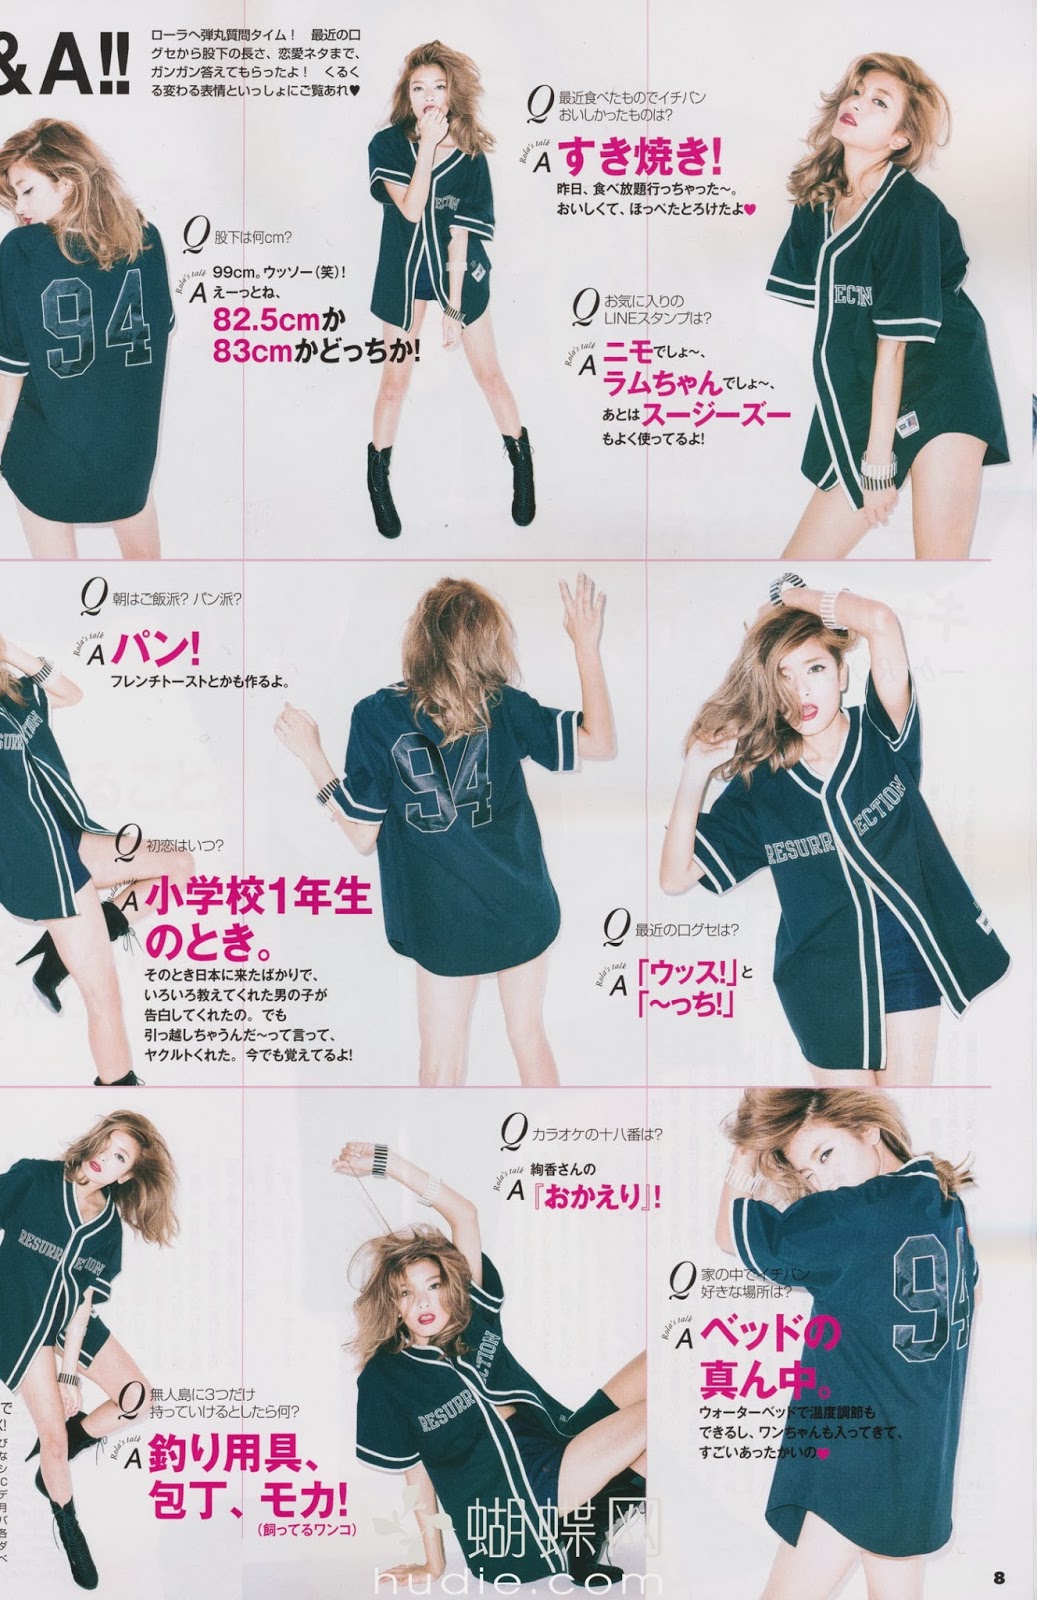 Magazines - The Charmer Pages : Rola - Jelly Magazine Japan March 2014